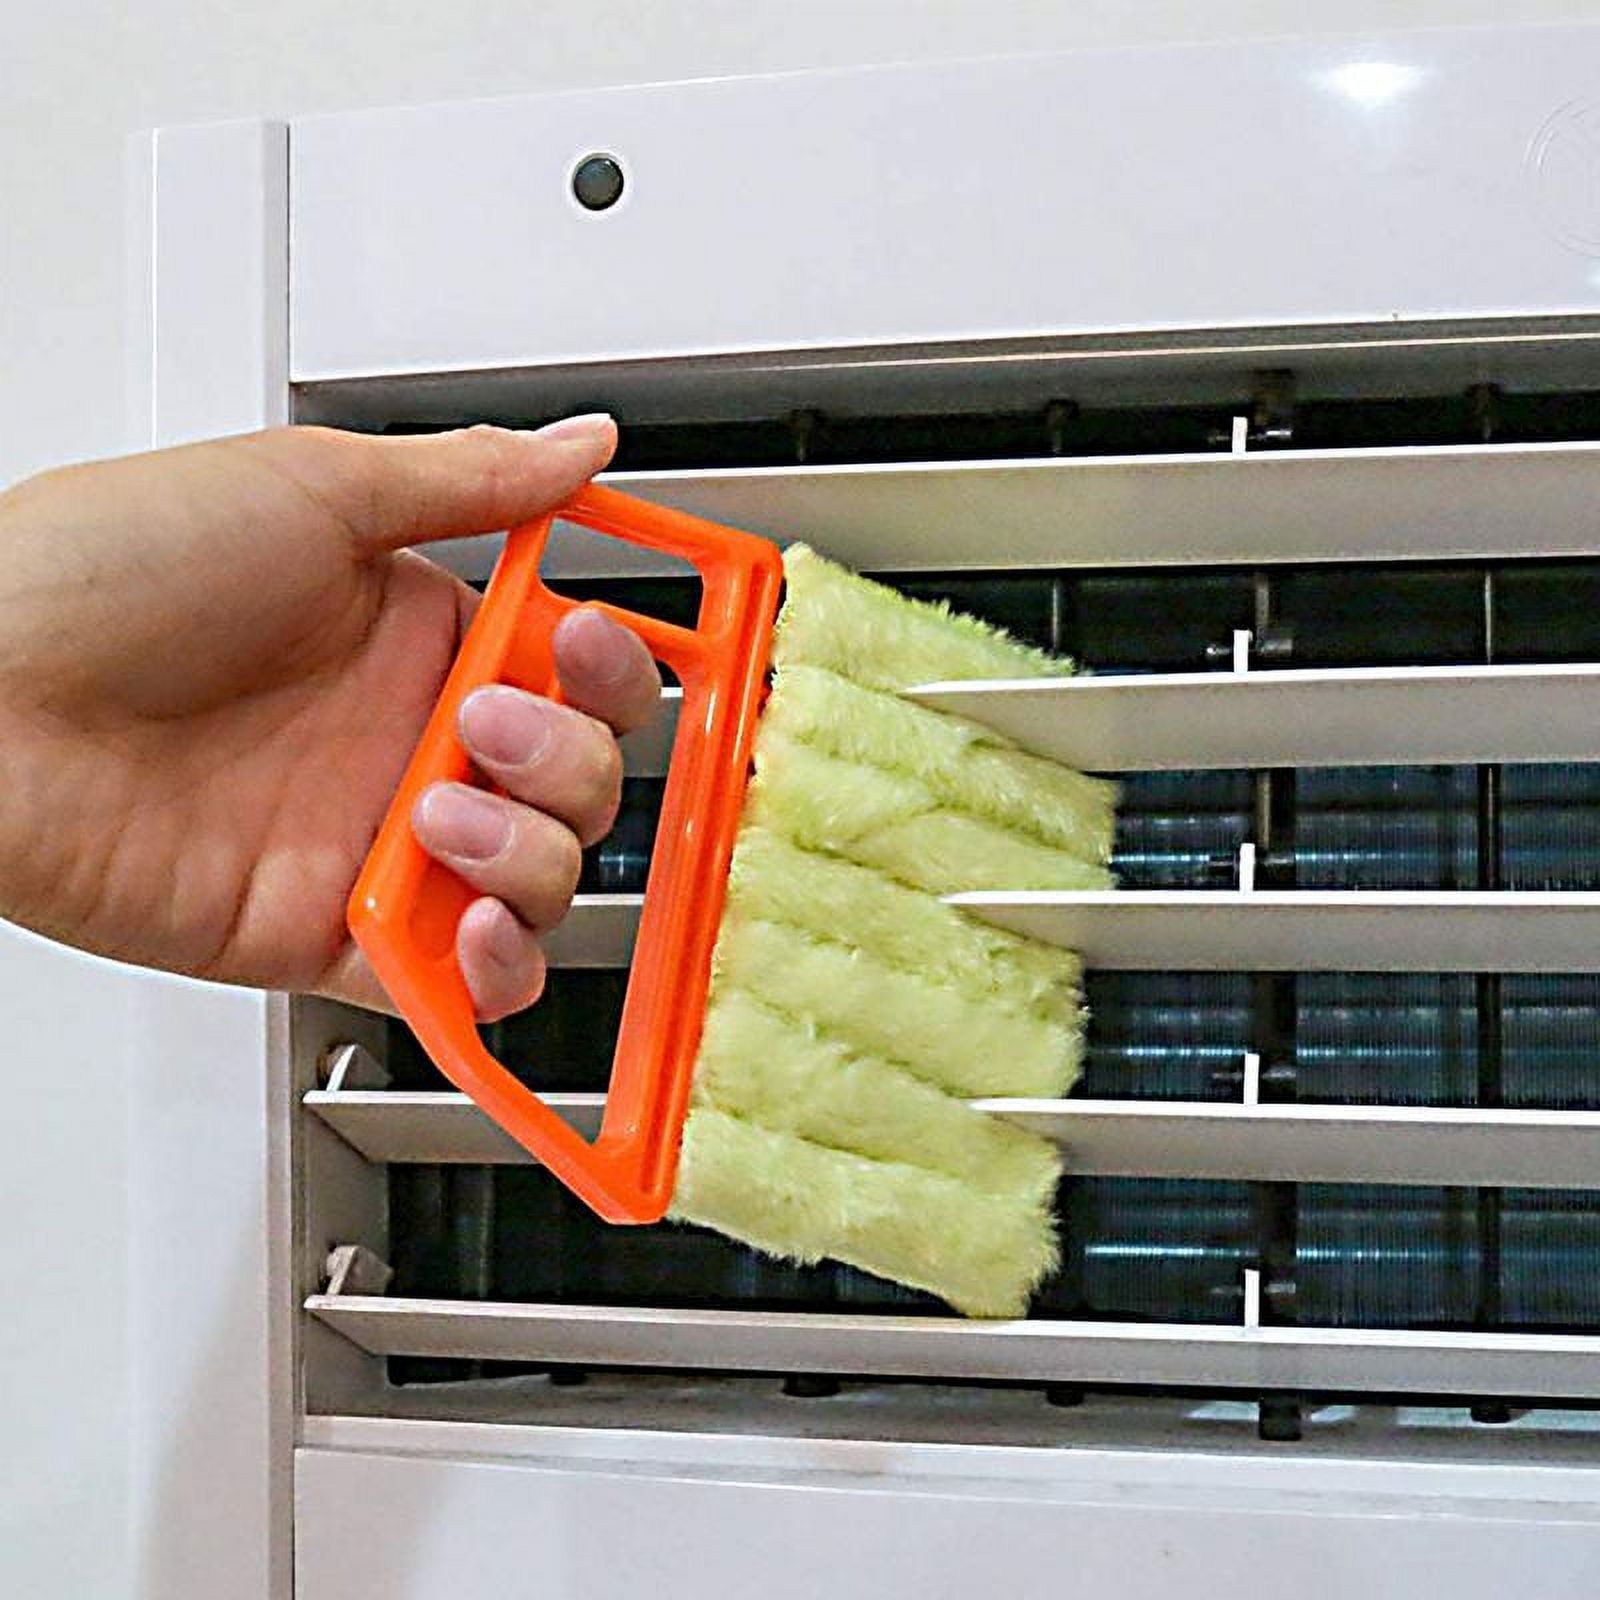 Window Blind Cleaner - 2 Clamps and 5 Removable Sleeves - Ideal Duster  Cleaning Tool for Blinds, Shutters, Shades, Air Conditioner Vent Covers,  etc. 